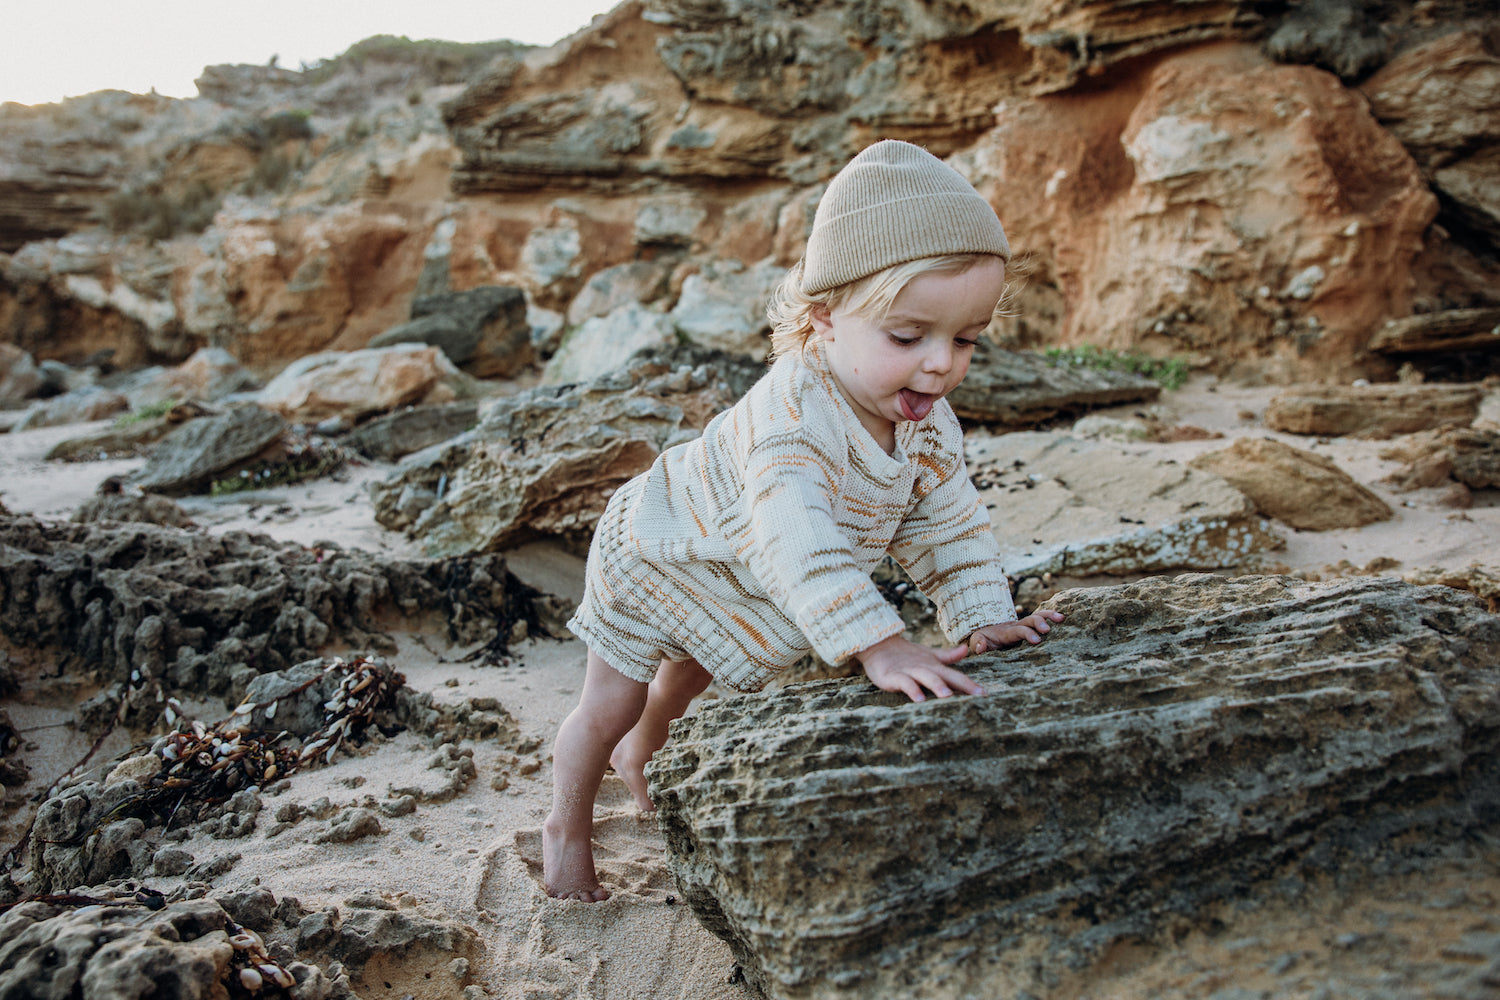 Grown Space Dye Pull Over in Rye | 30% OFF | Children of the Wild